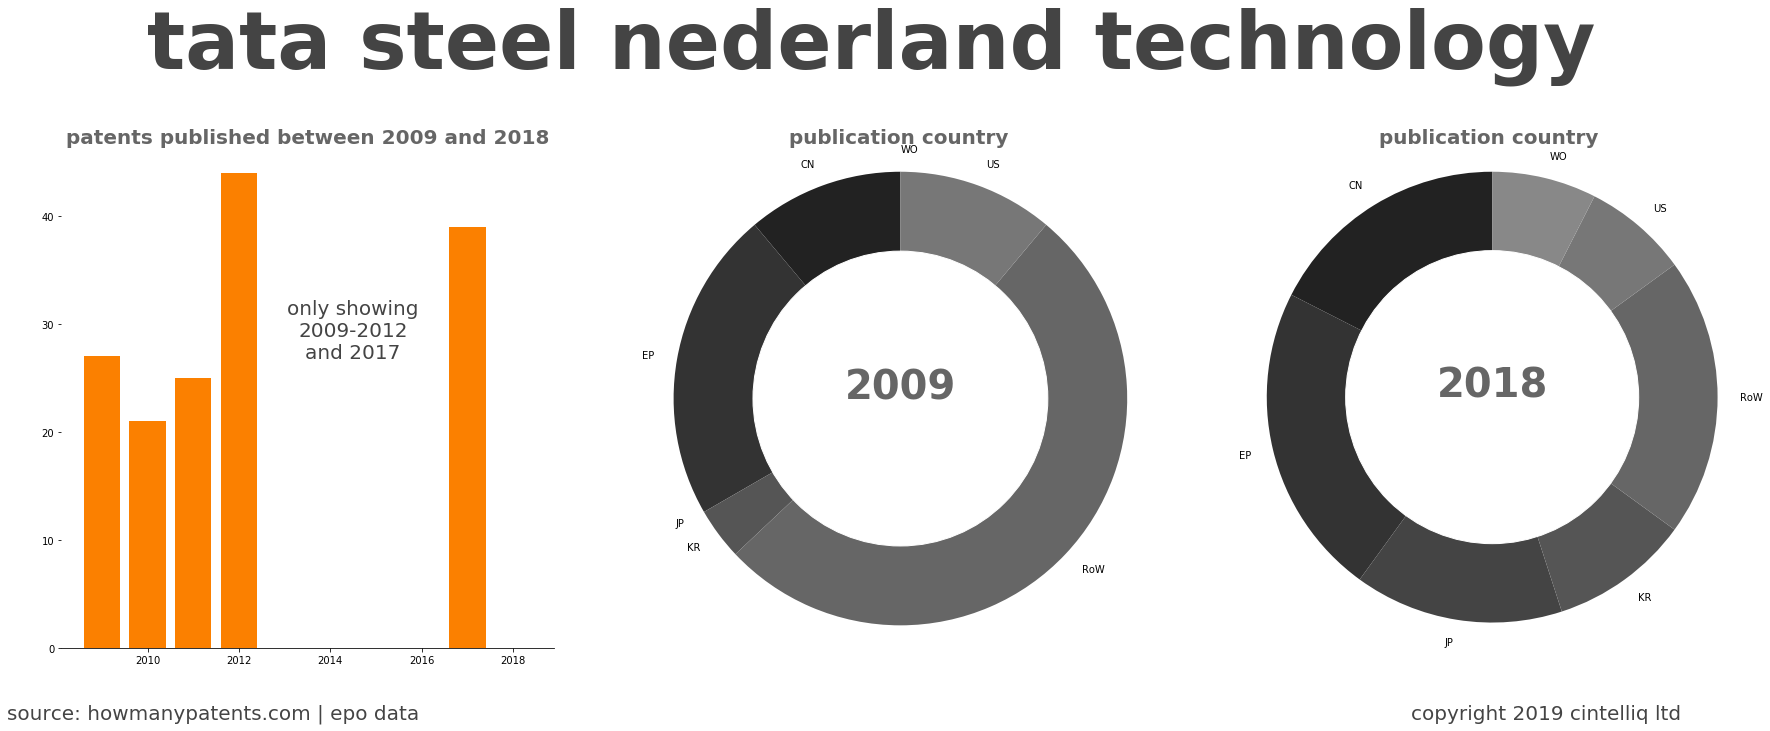 summary of patents for Tata Steel Nederland Technology